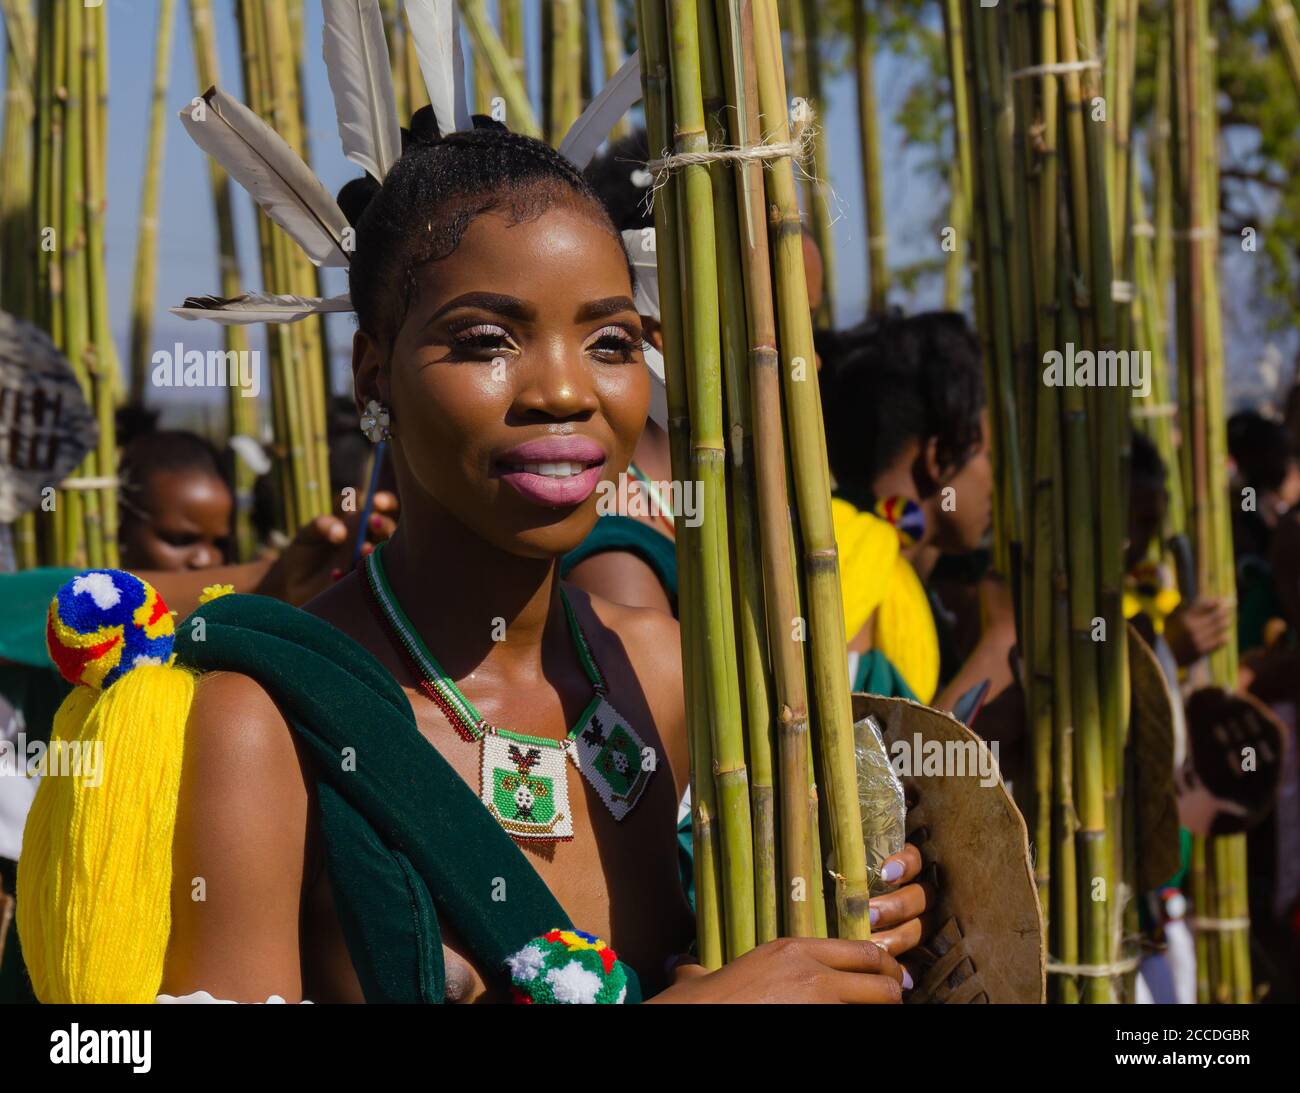 Umhlanga, or Reed Dance, an anual ceremony in Eswatini, ex-Swaziland. Thousands of unmarried and virgins swazi girls dance for the royal family Stock Photo